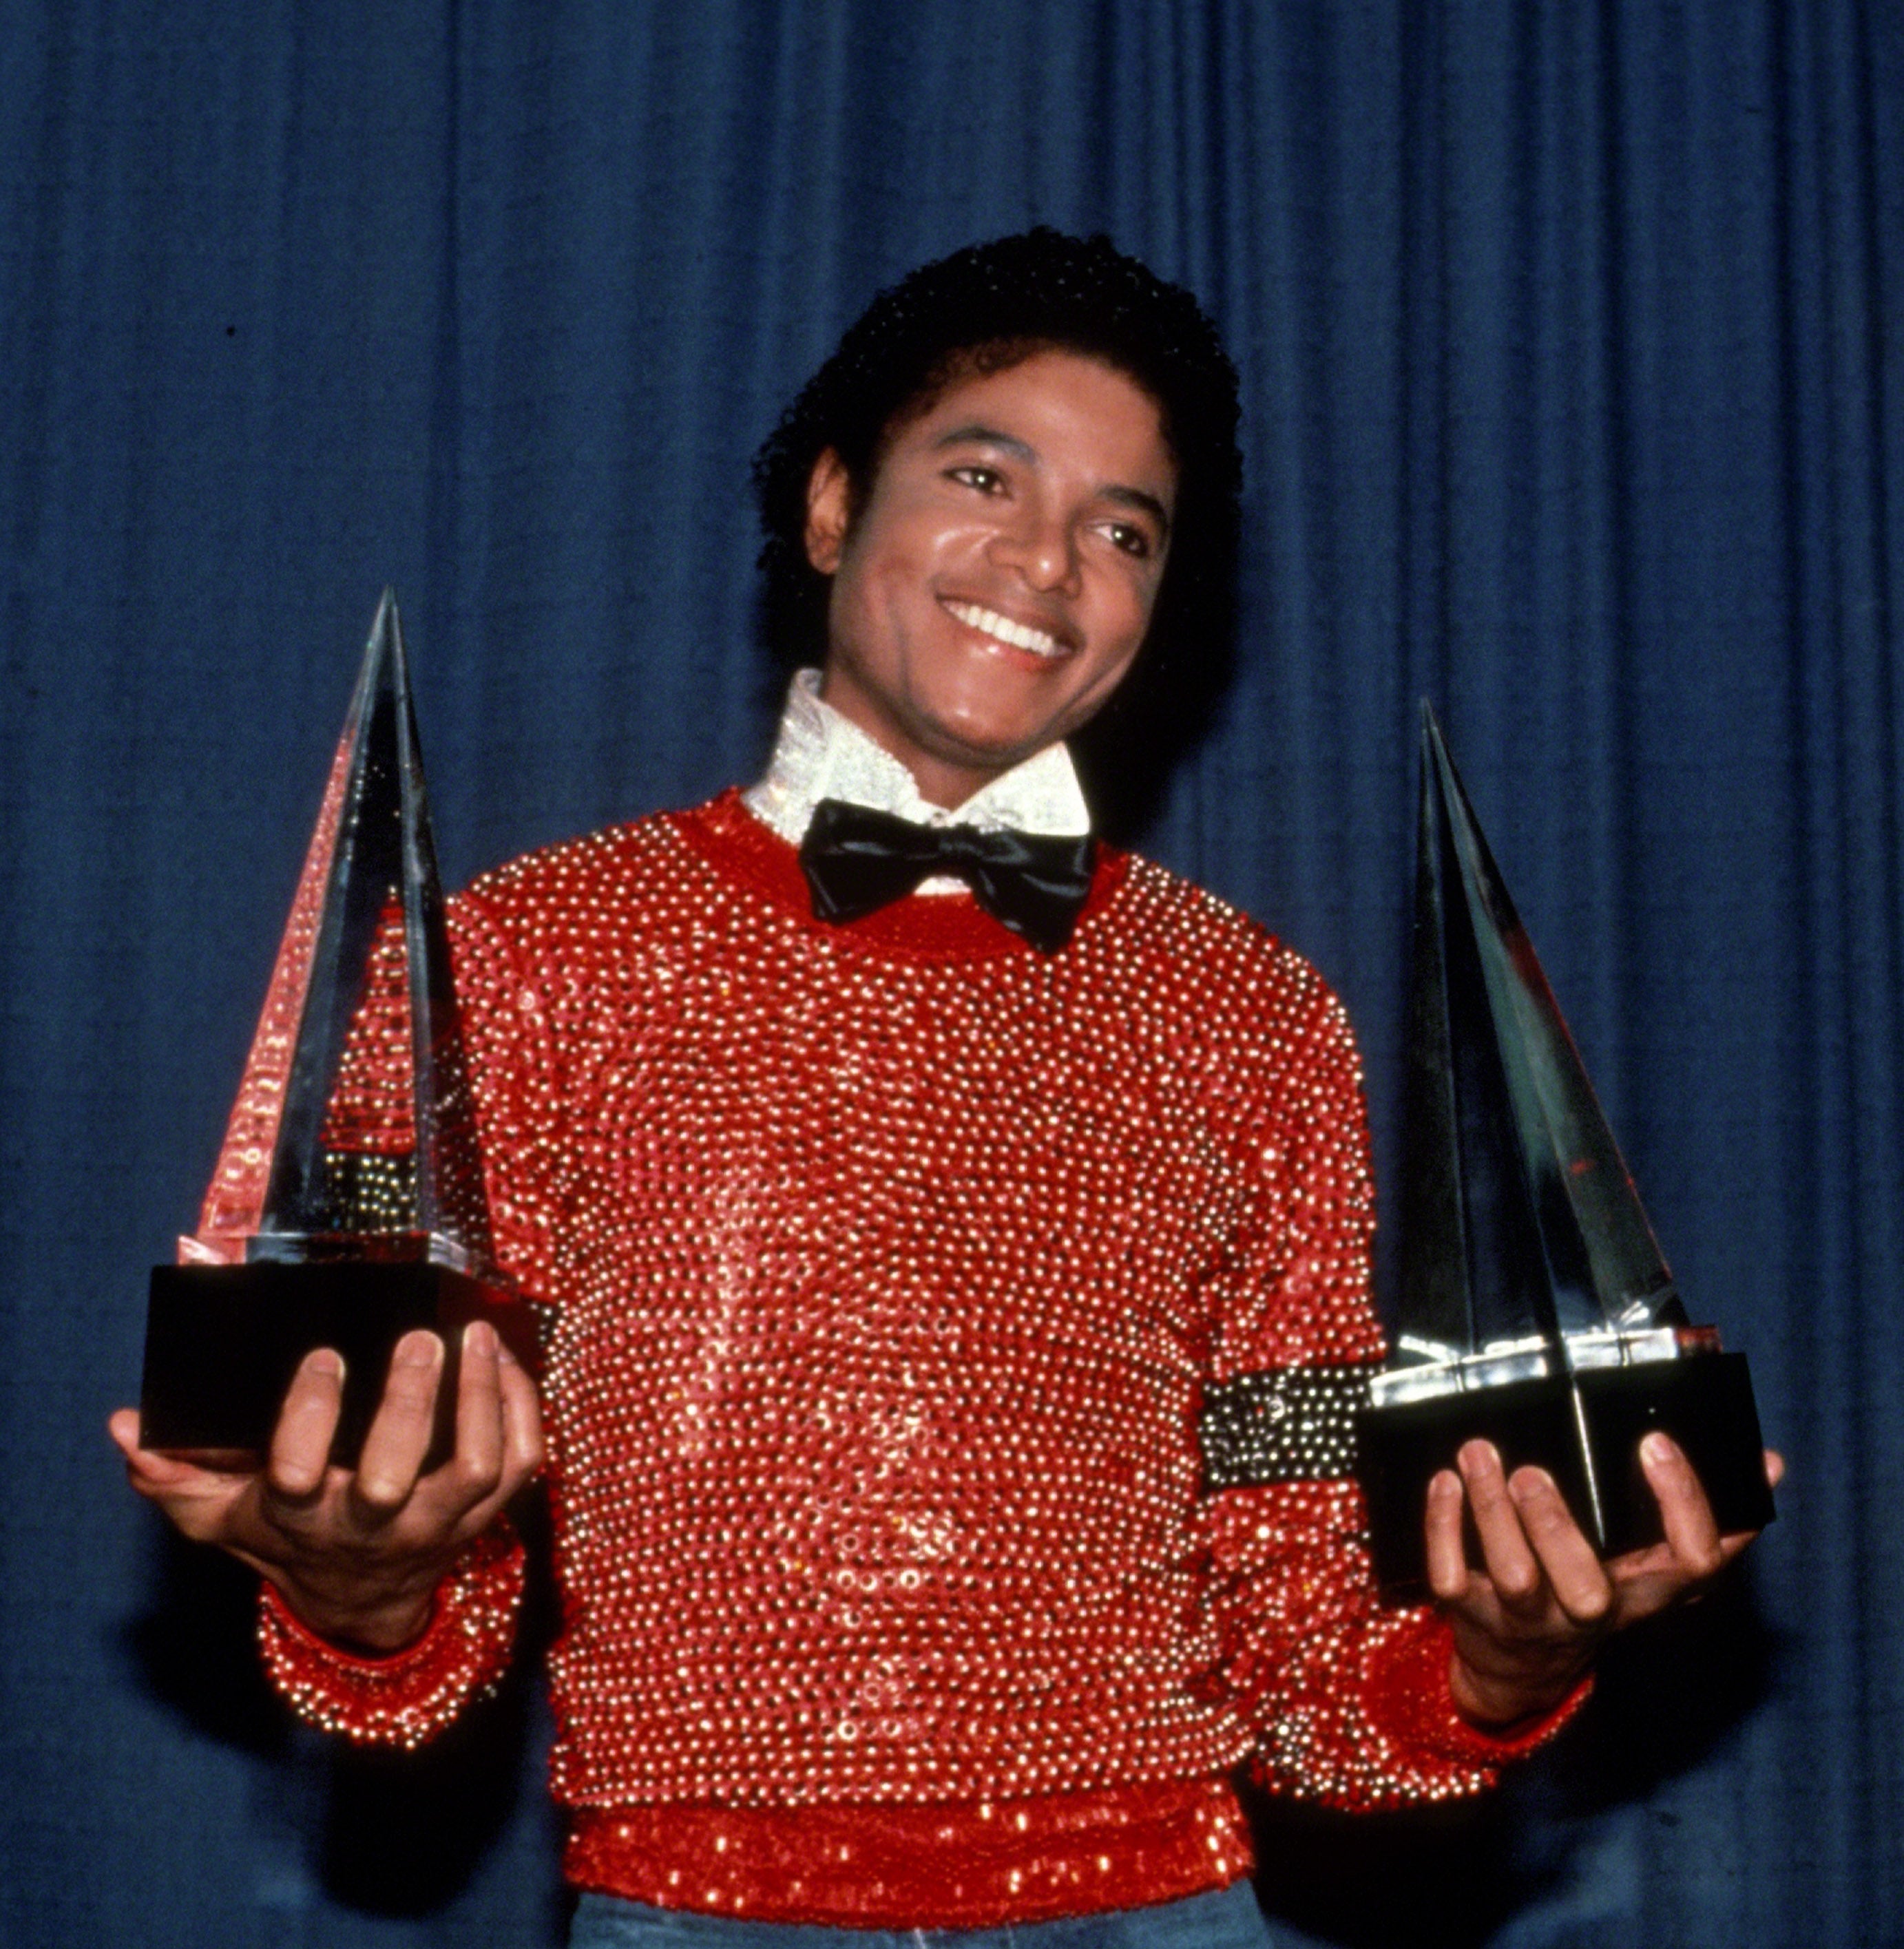 30 Photos That Prove Michael Jackson's Style Was the Epitome of Cool
